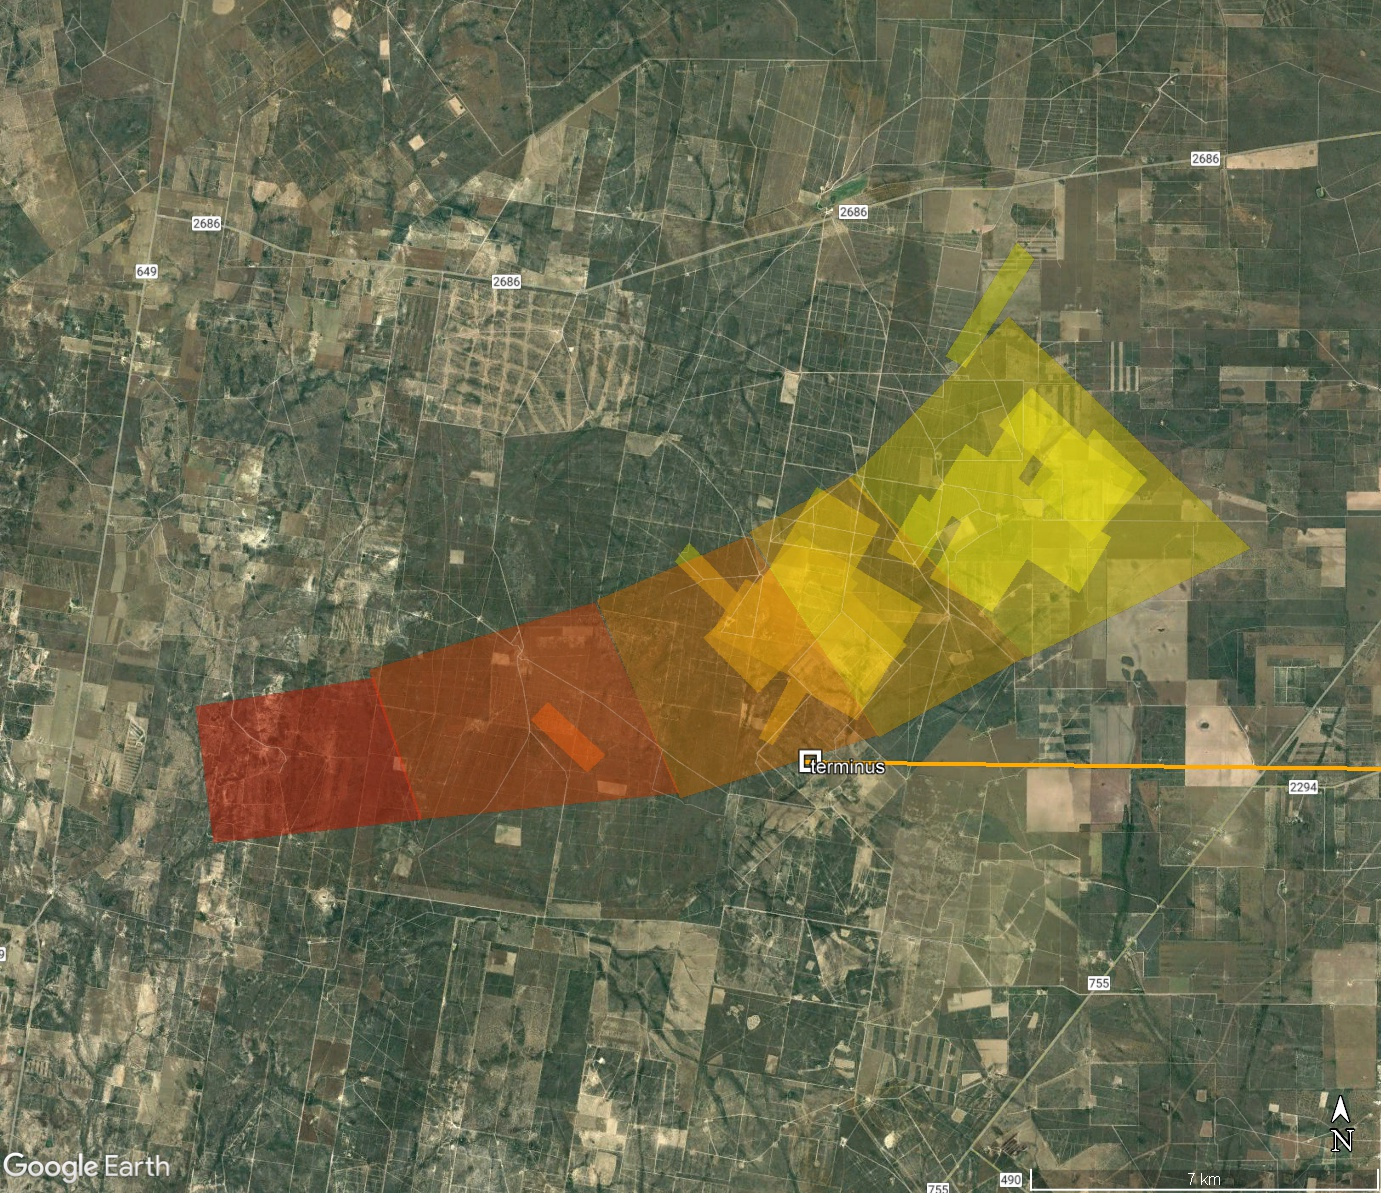 Estimated strewn field, colored by meteorite mass. Yellow is 1g, up to red = 1,000g. This is an estimate which may change if information about the meteor direction and descent angle updates.